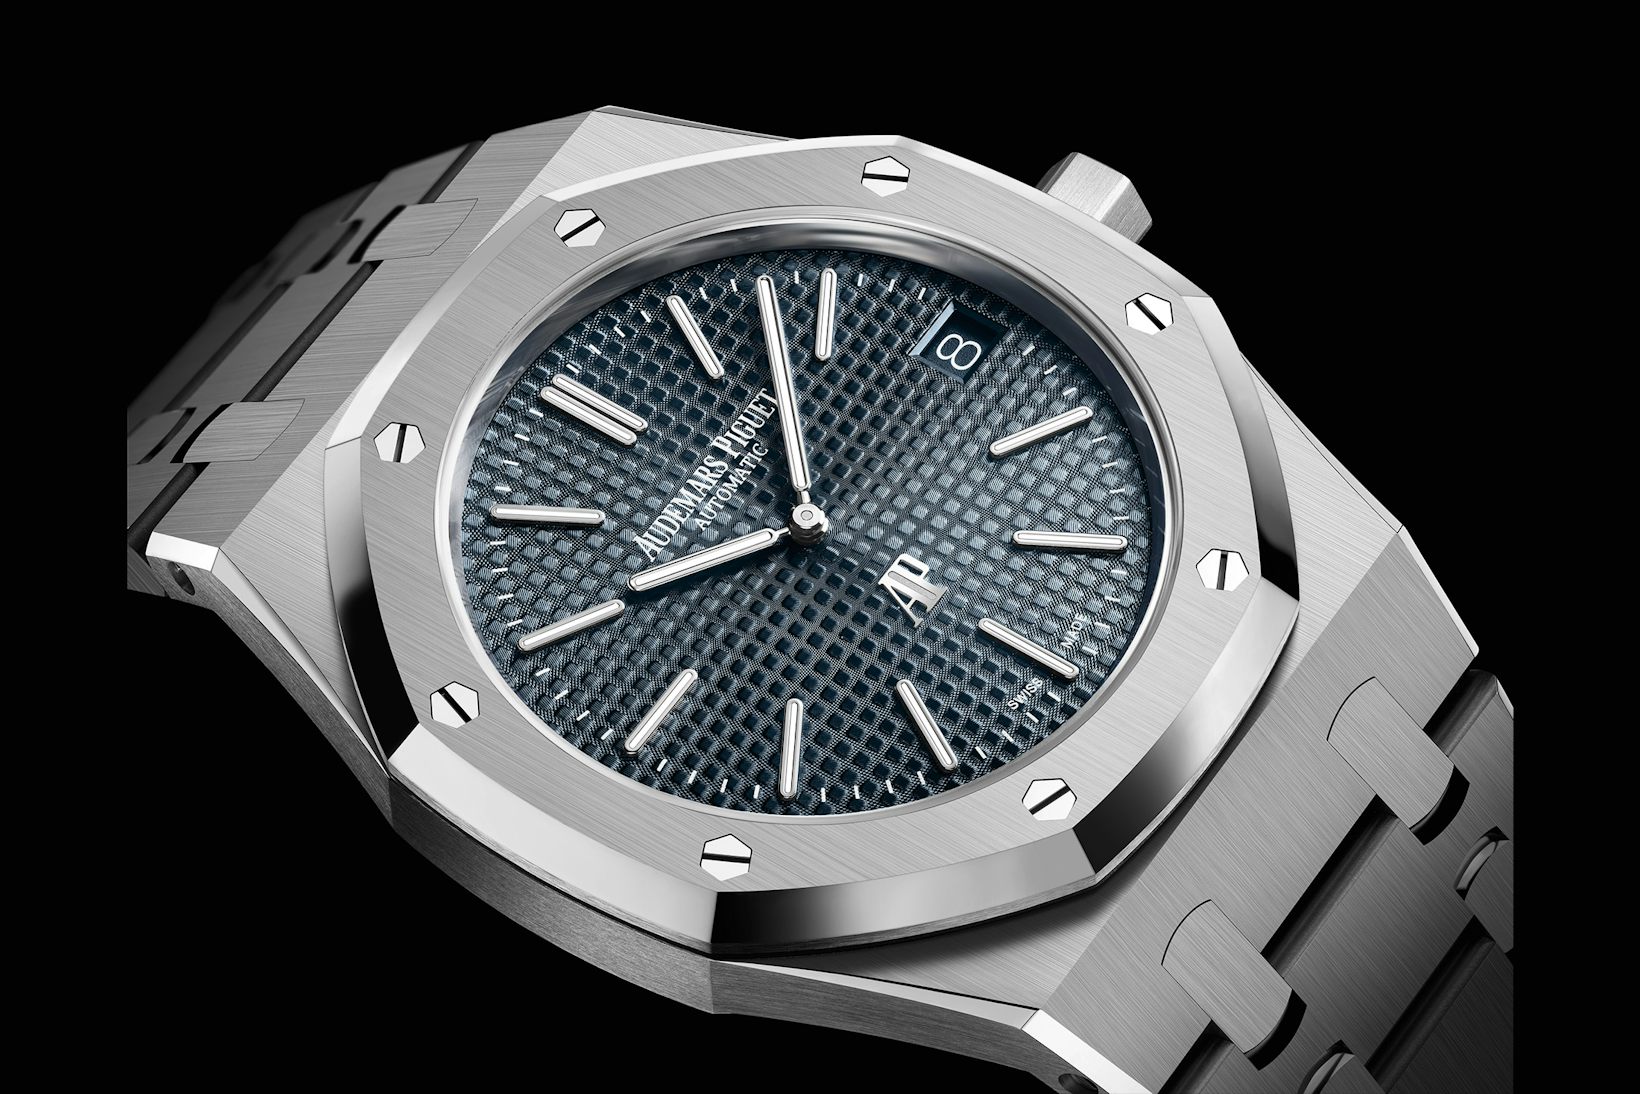 Prices Rise 50% For Audemars Piguet's Royal Oak Jumbo As CEO Says It Will  Be Axed Next Year